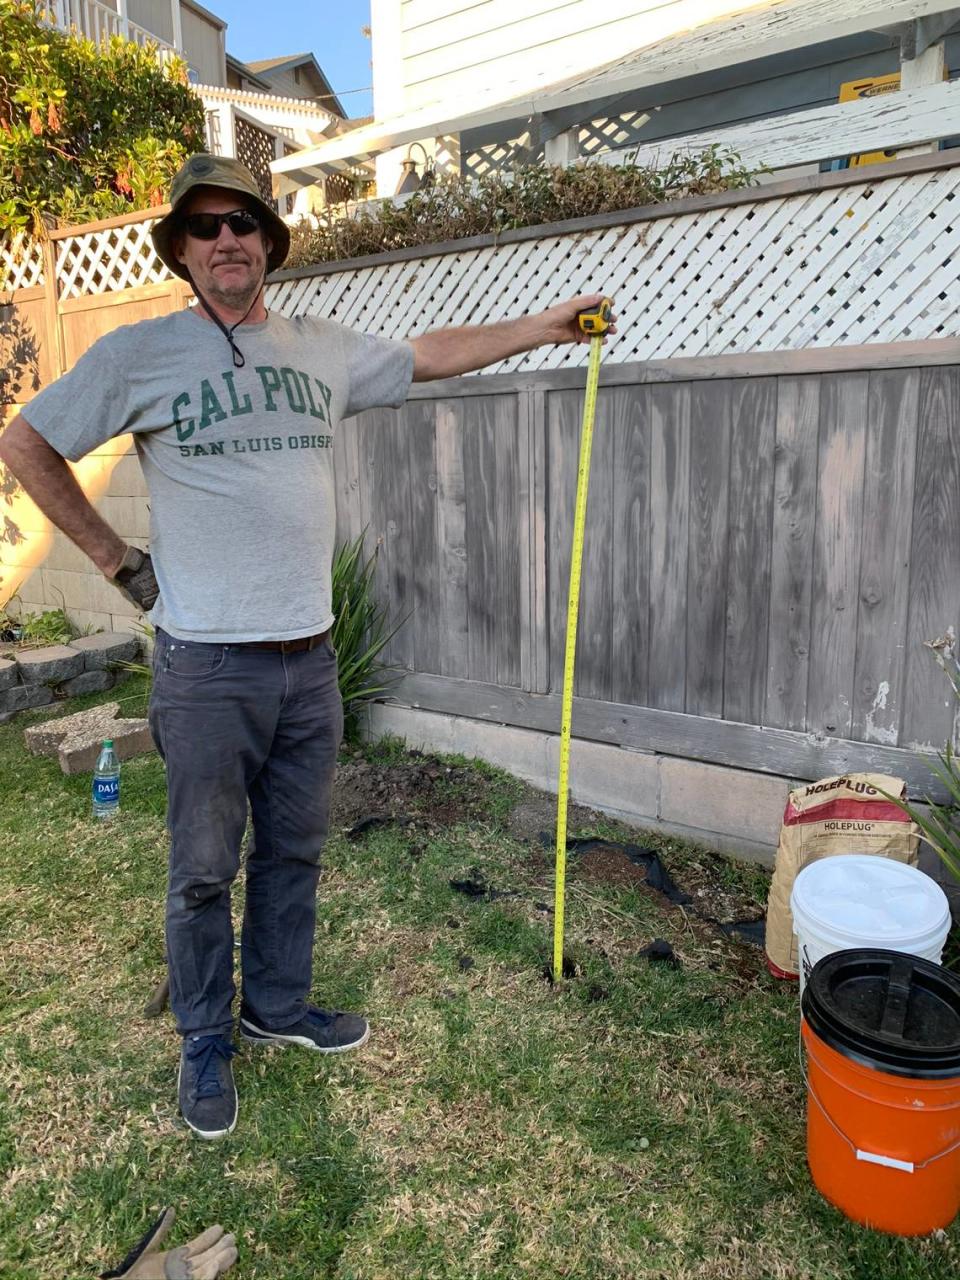 Tim Nelligan stands next to one of the holes they created in Marcia Papich’s yard to measure human decomposition molecules in February 2020, showing the hole he dug was 5 feet down. They were testing for evidence in the search for Kristin Smart’s body.